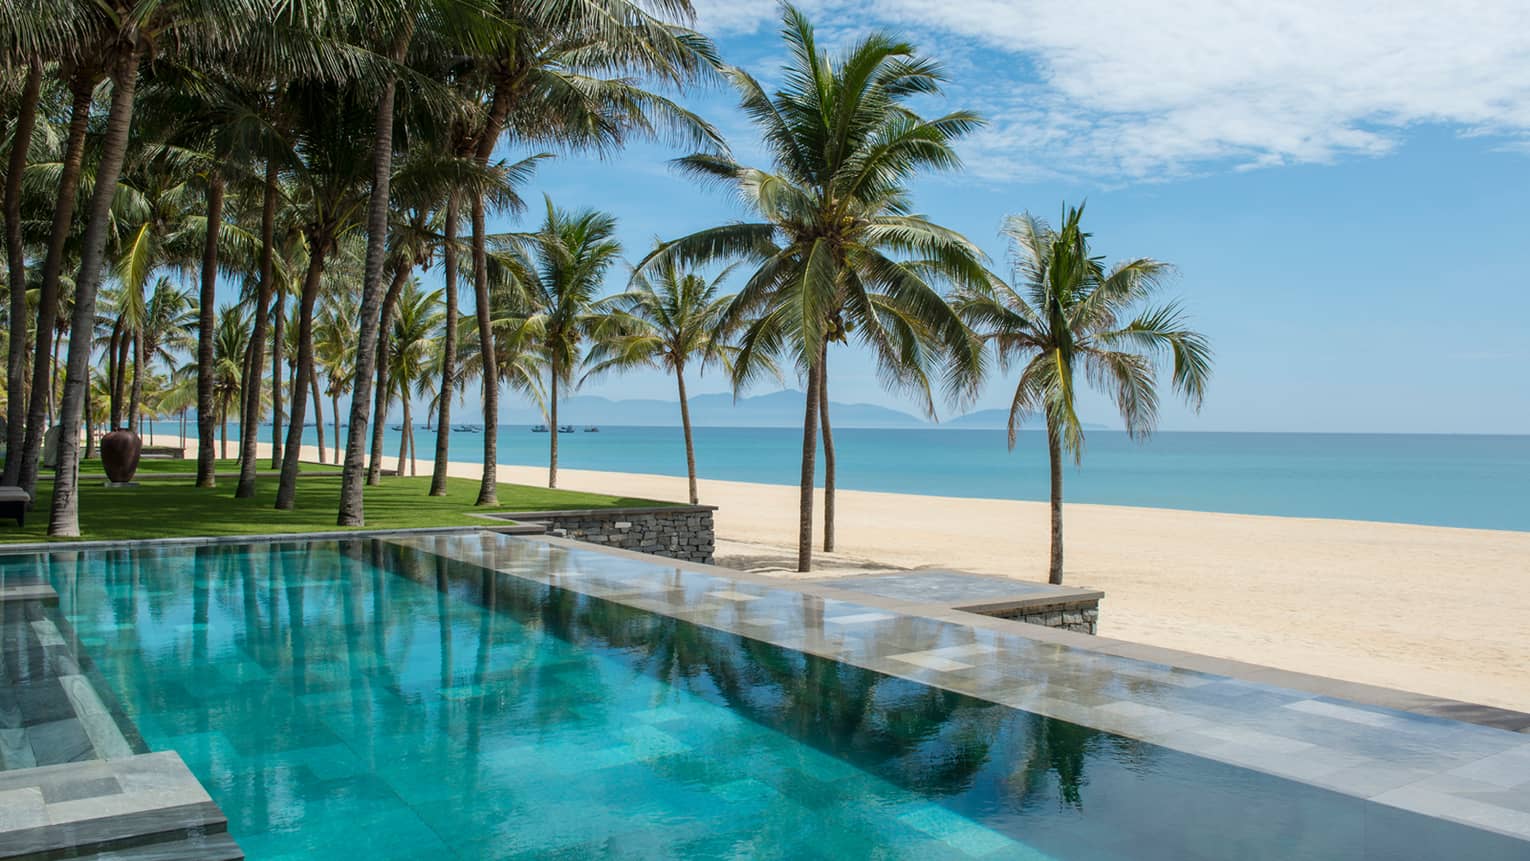 Tall palm trees between stone outdoor swimming pool and white sand beach